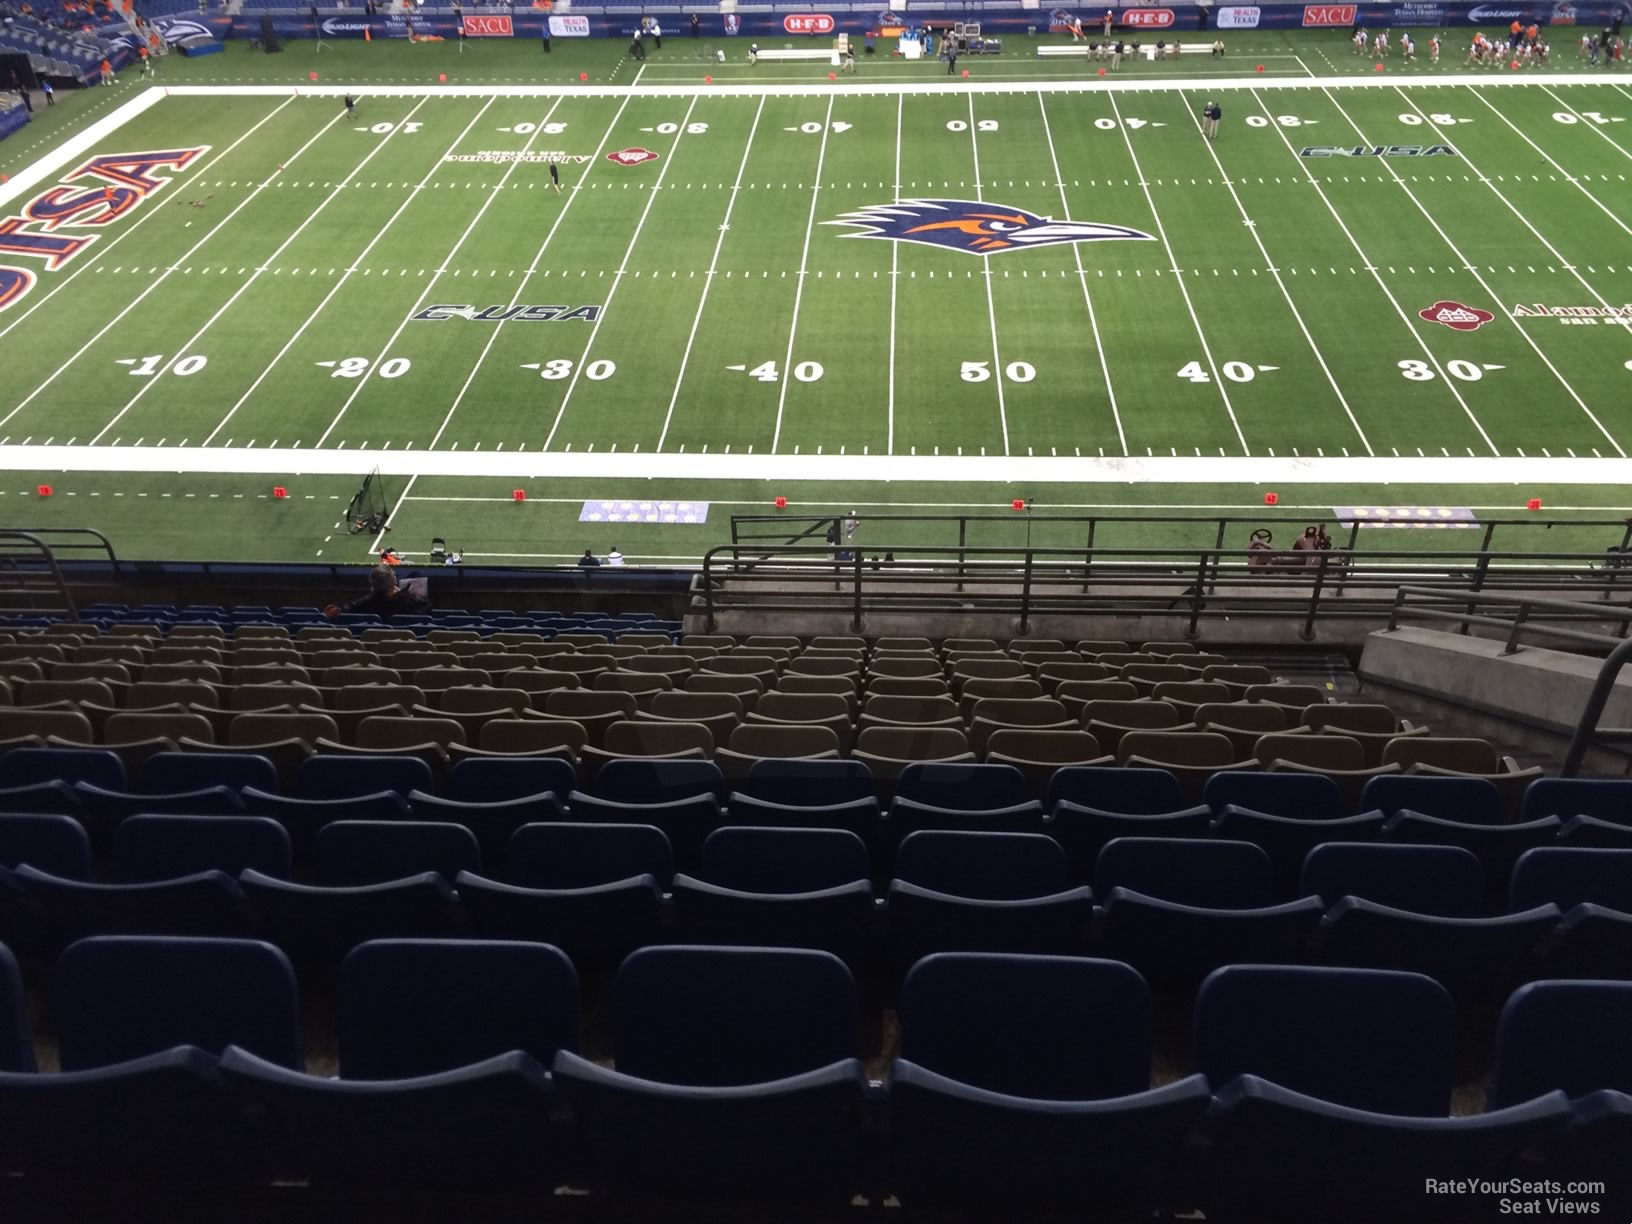 section 313, row 15 seat view  for football - alamodome